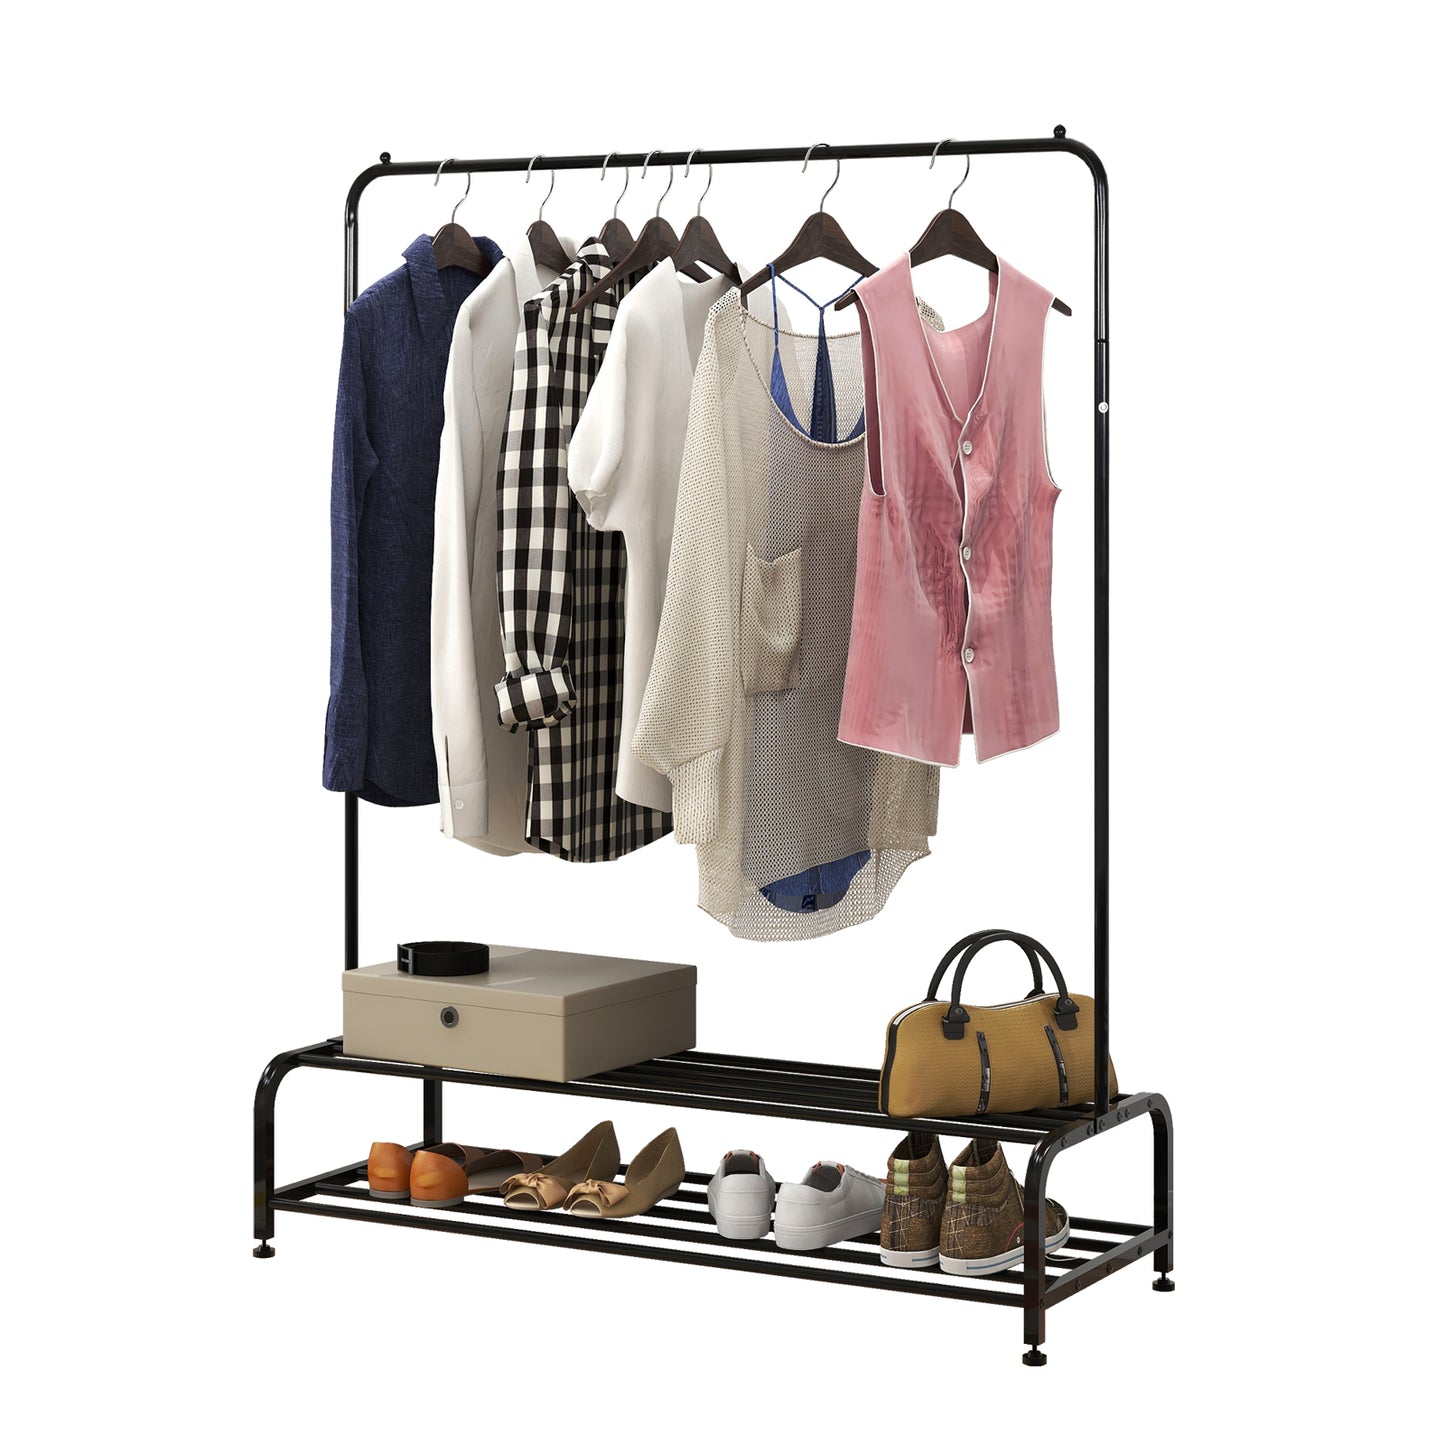 Clothes Rack and Rail